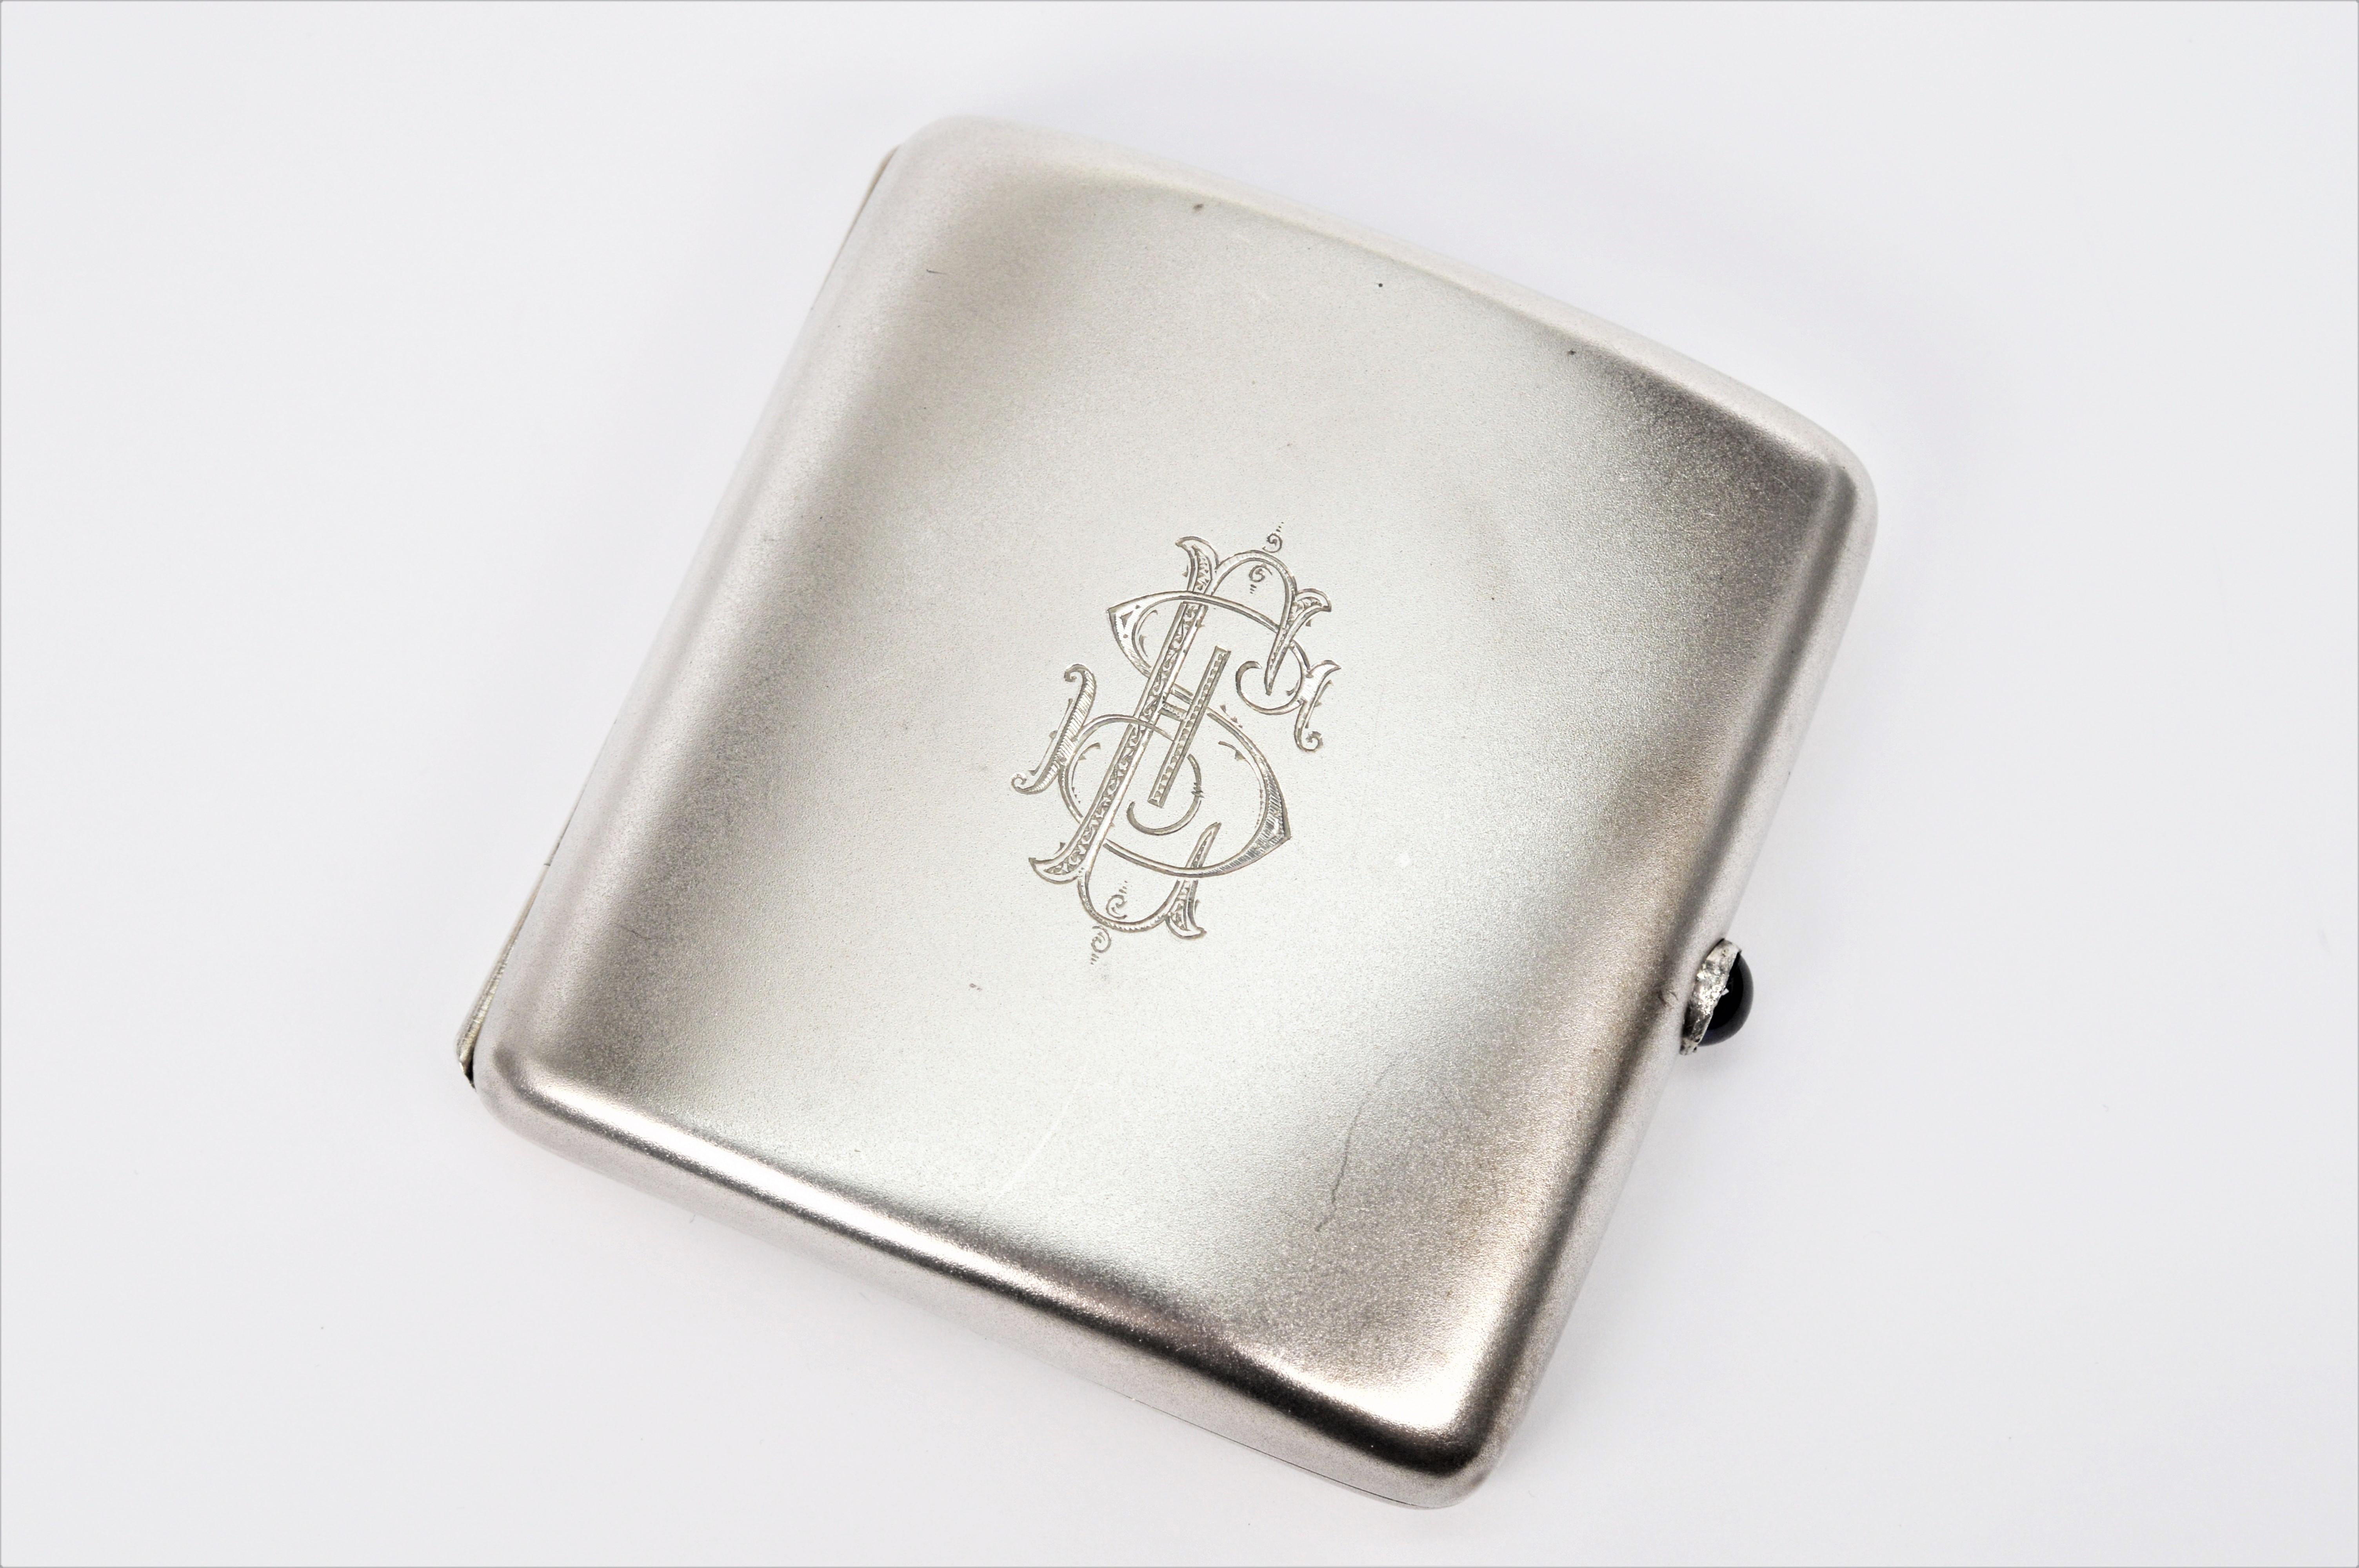 In .900 silver with a smooth sandblast satin-like finish this pre-war collectable cigarette case is a find. Its contoured shape make it easy to carry comfortably in a pocket or close to the body.
Decorated with monogram in old English style script